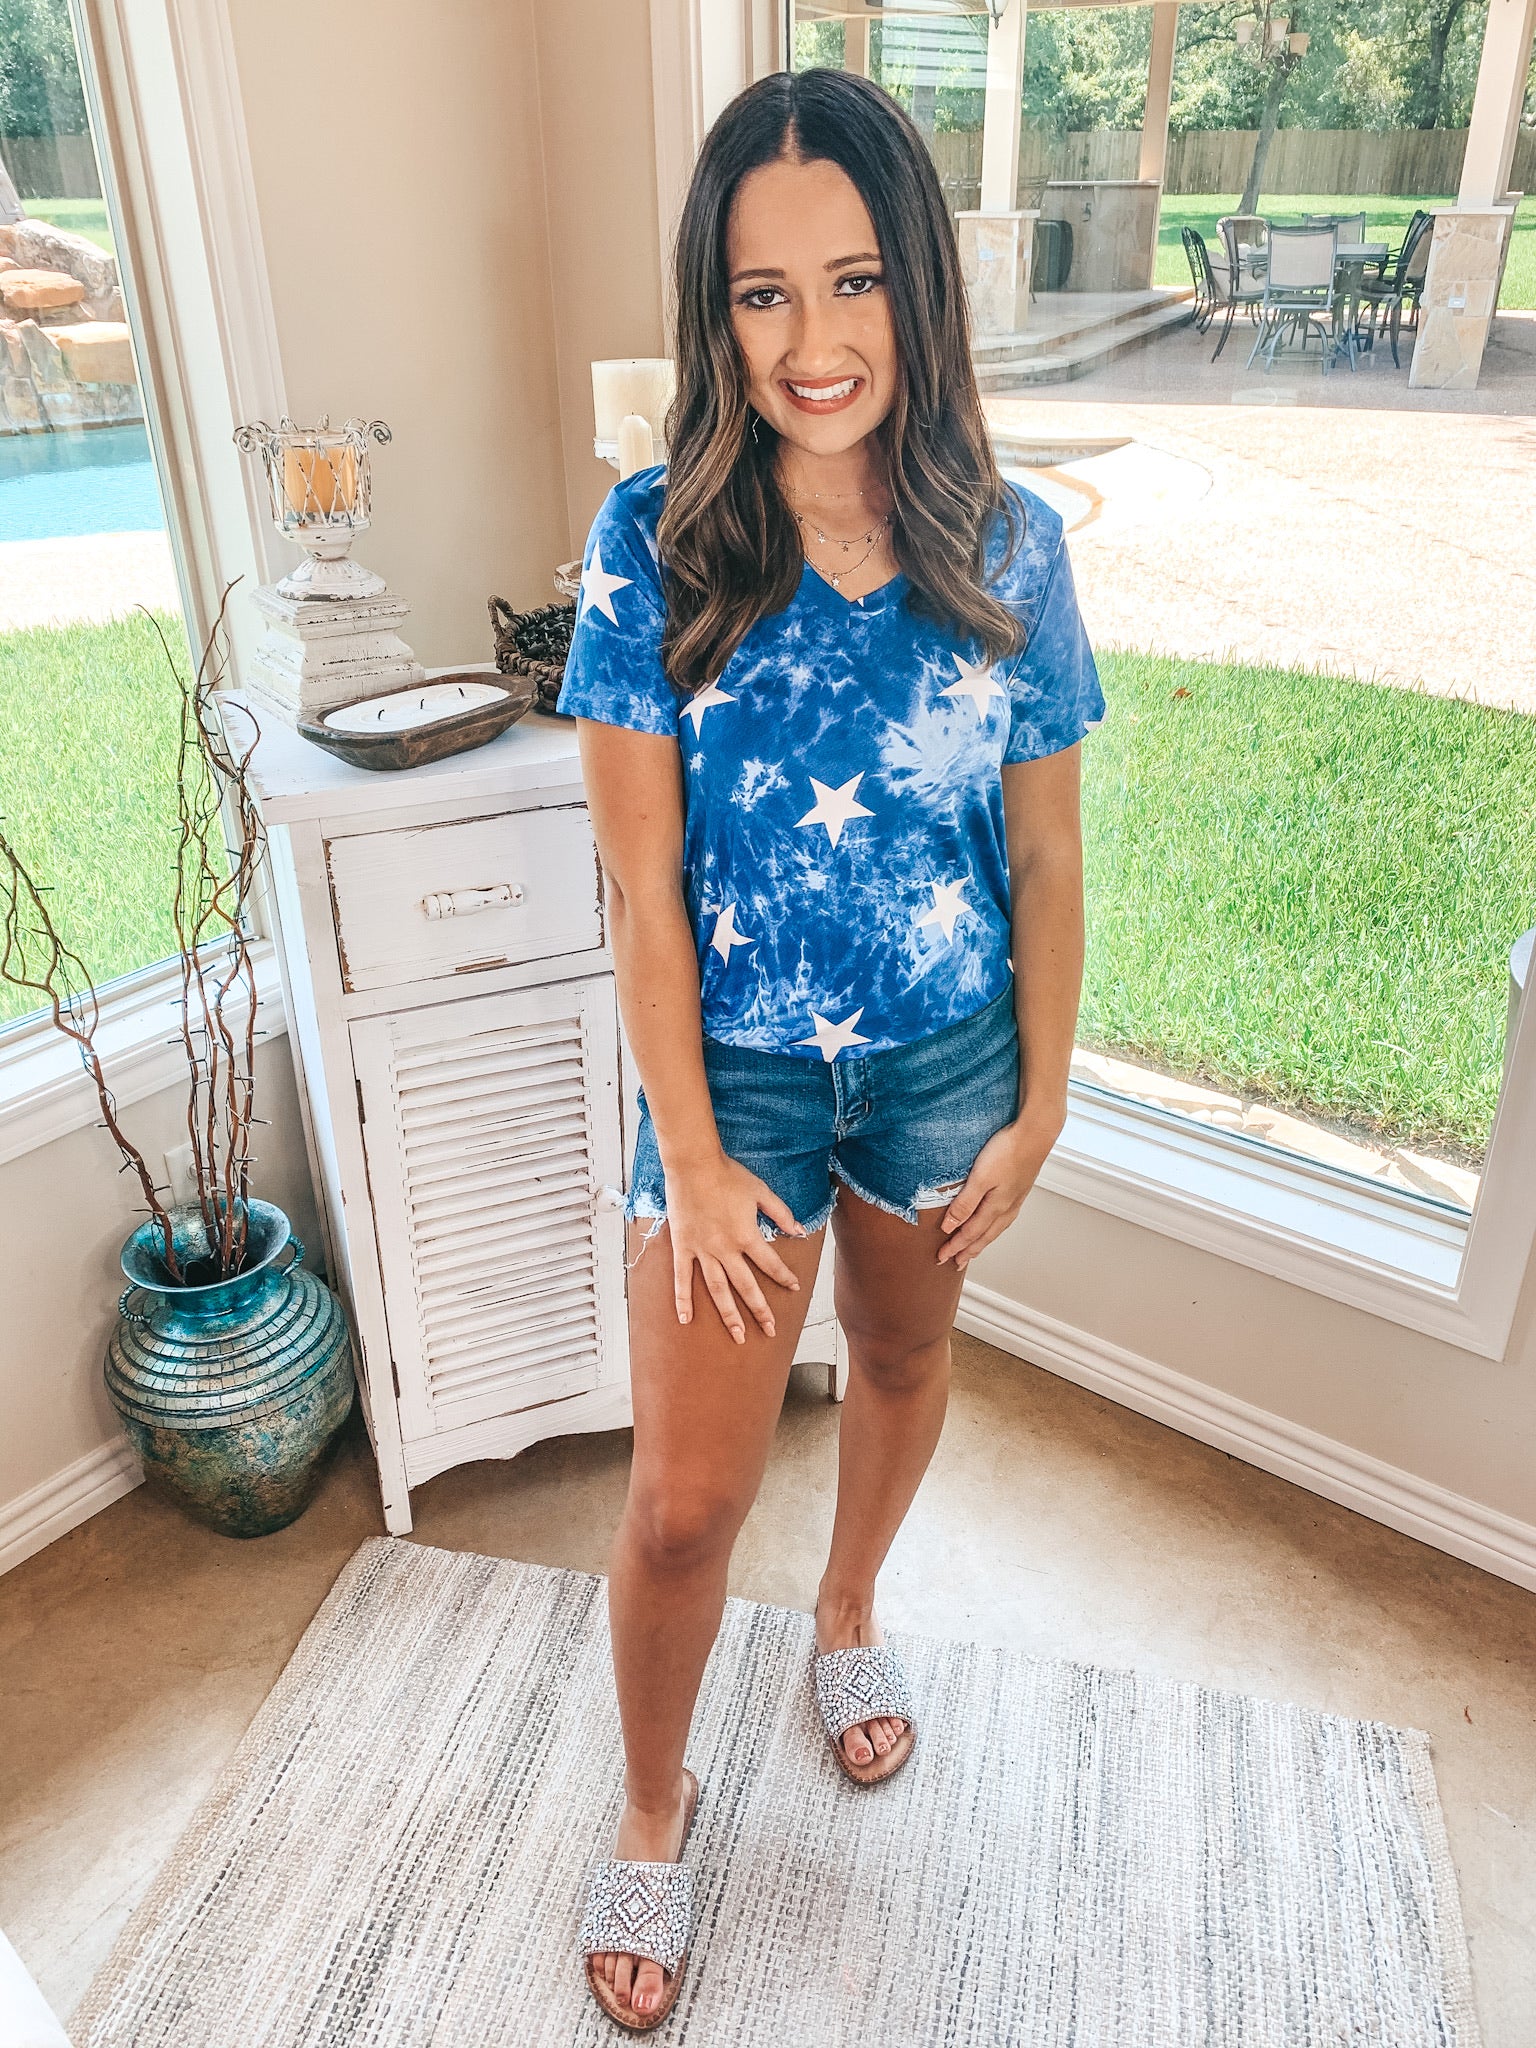 Stars in My Eyes Tie Dye V Neck Tee Shirt with Stars in Royal Blue